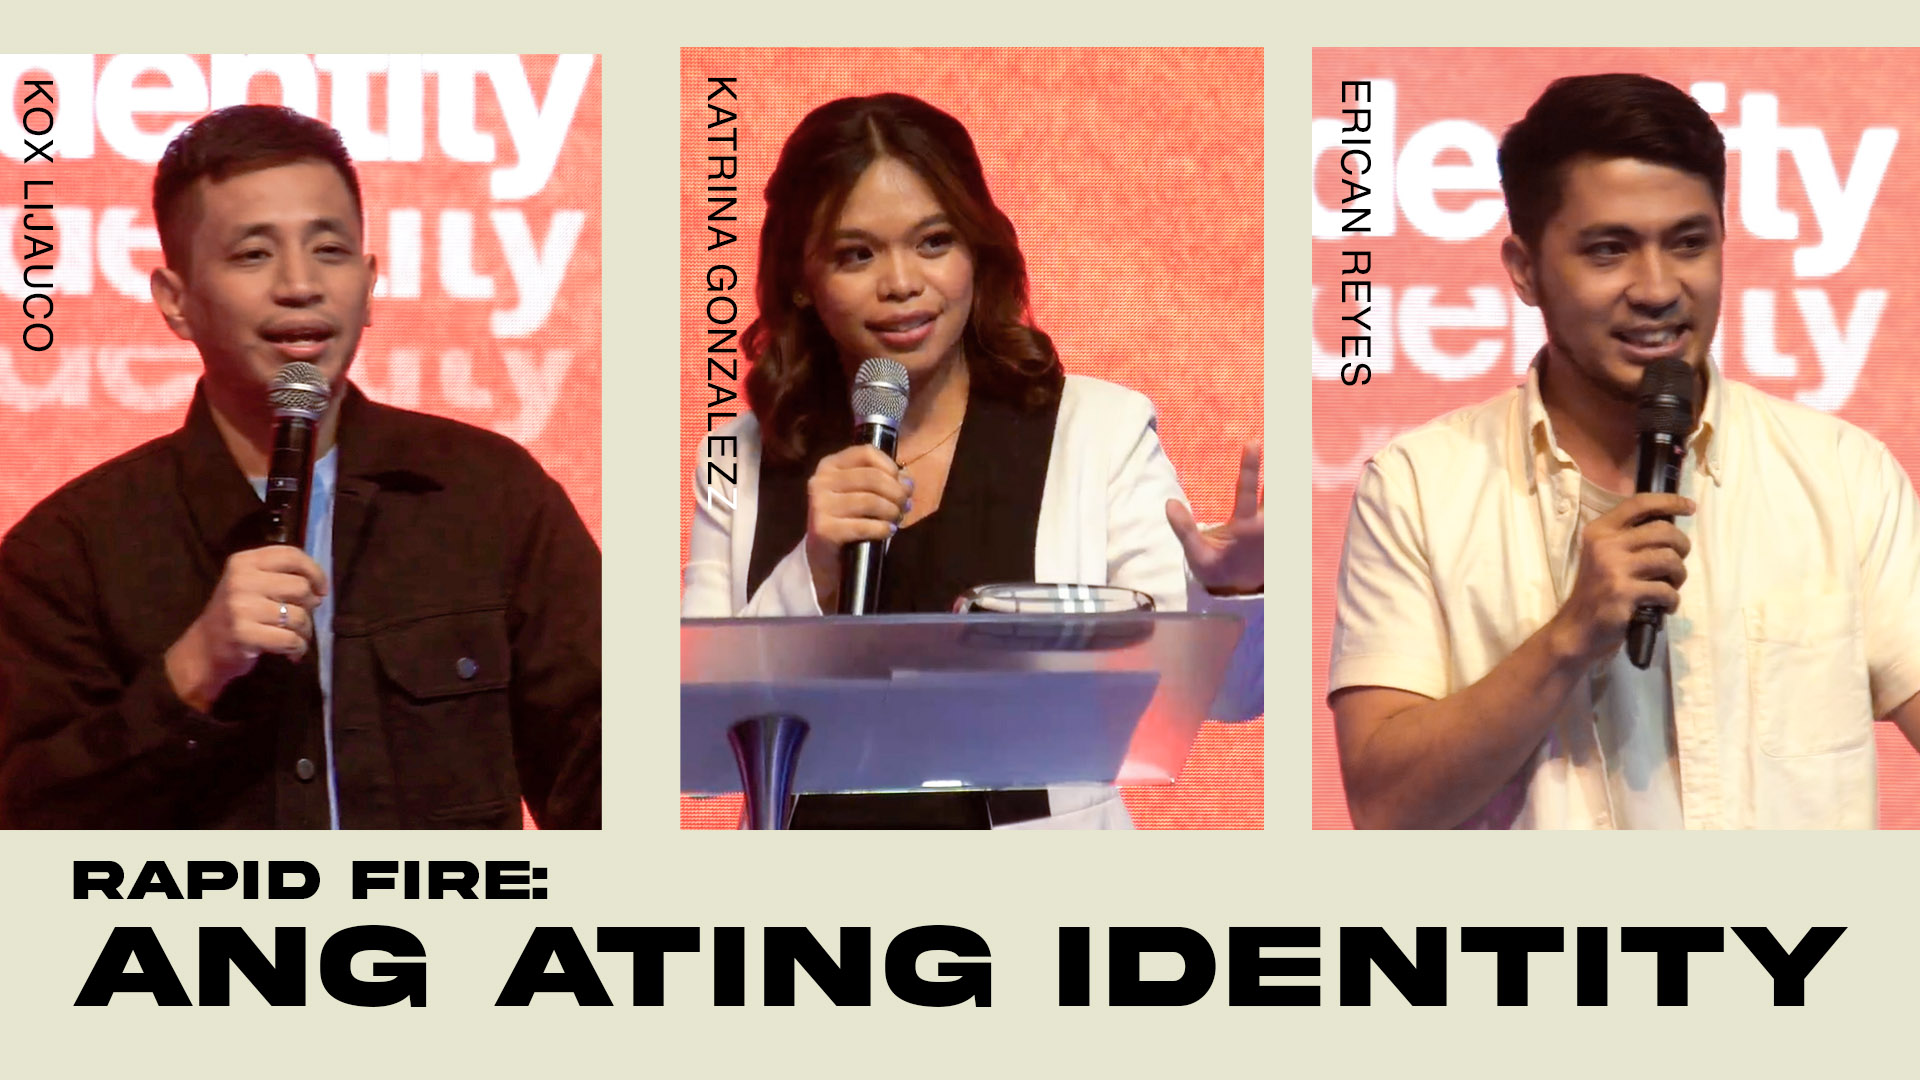 RAPID FIRE: ANG ATING IDENTITY Image